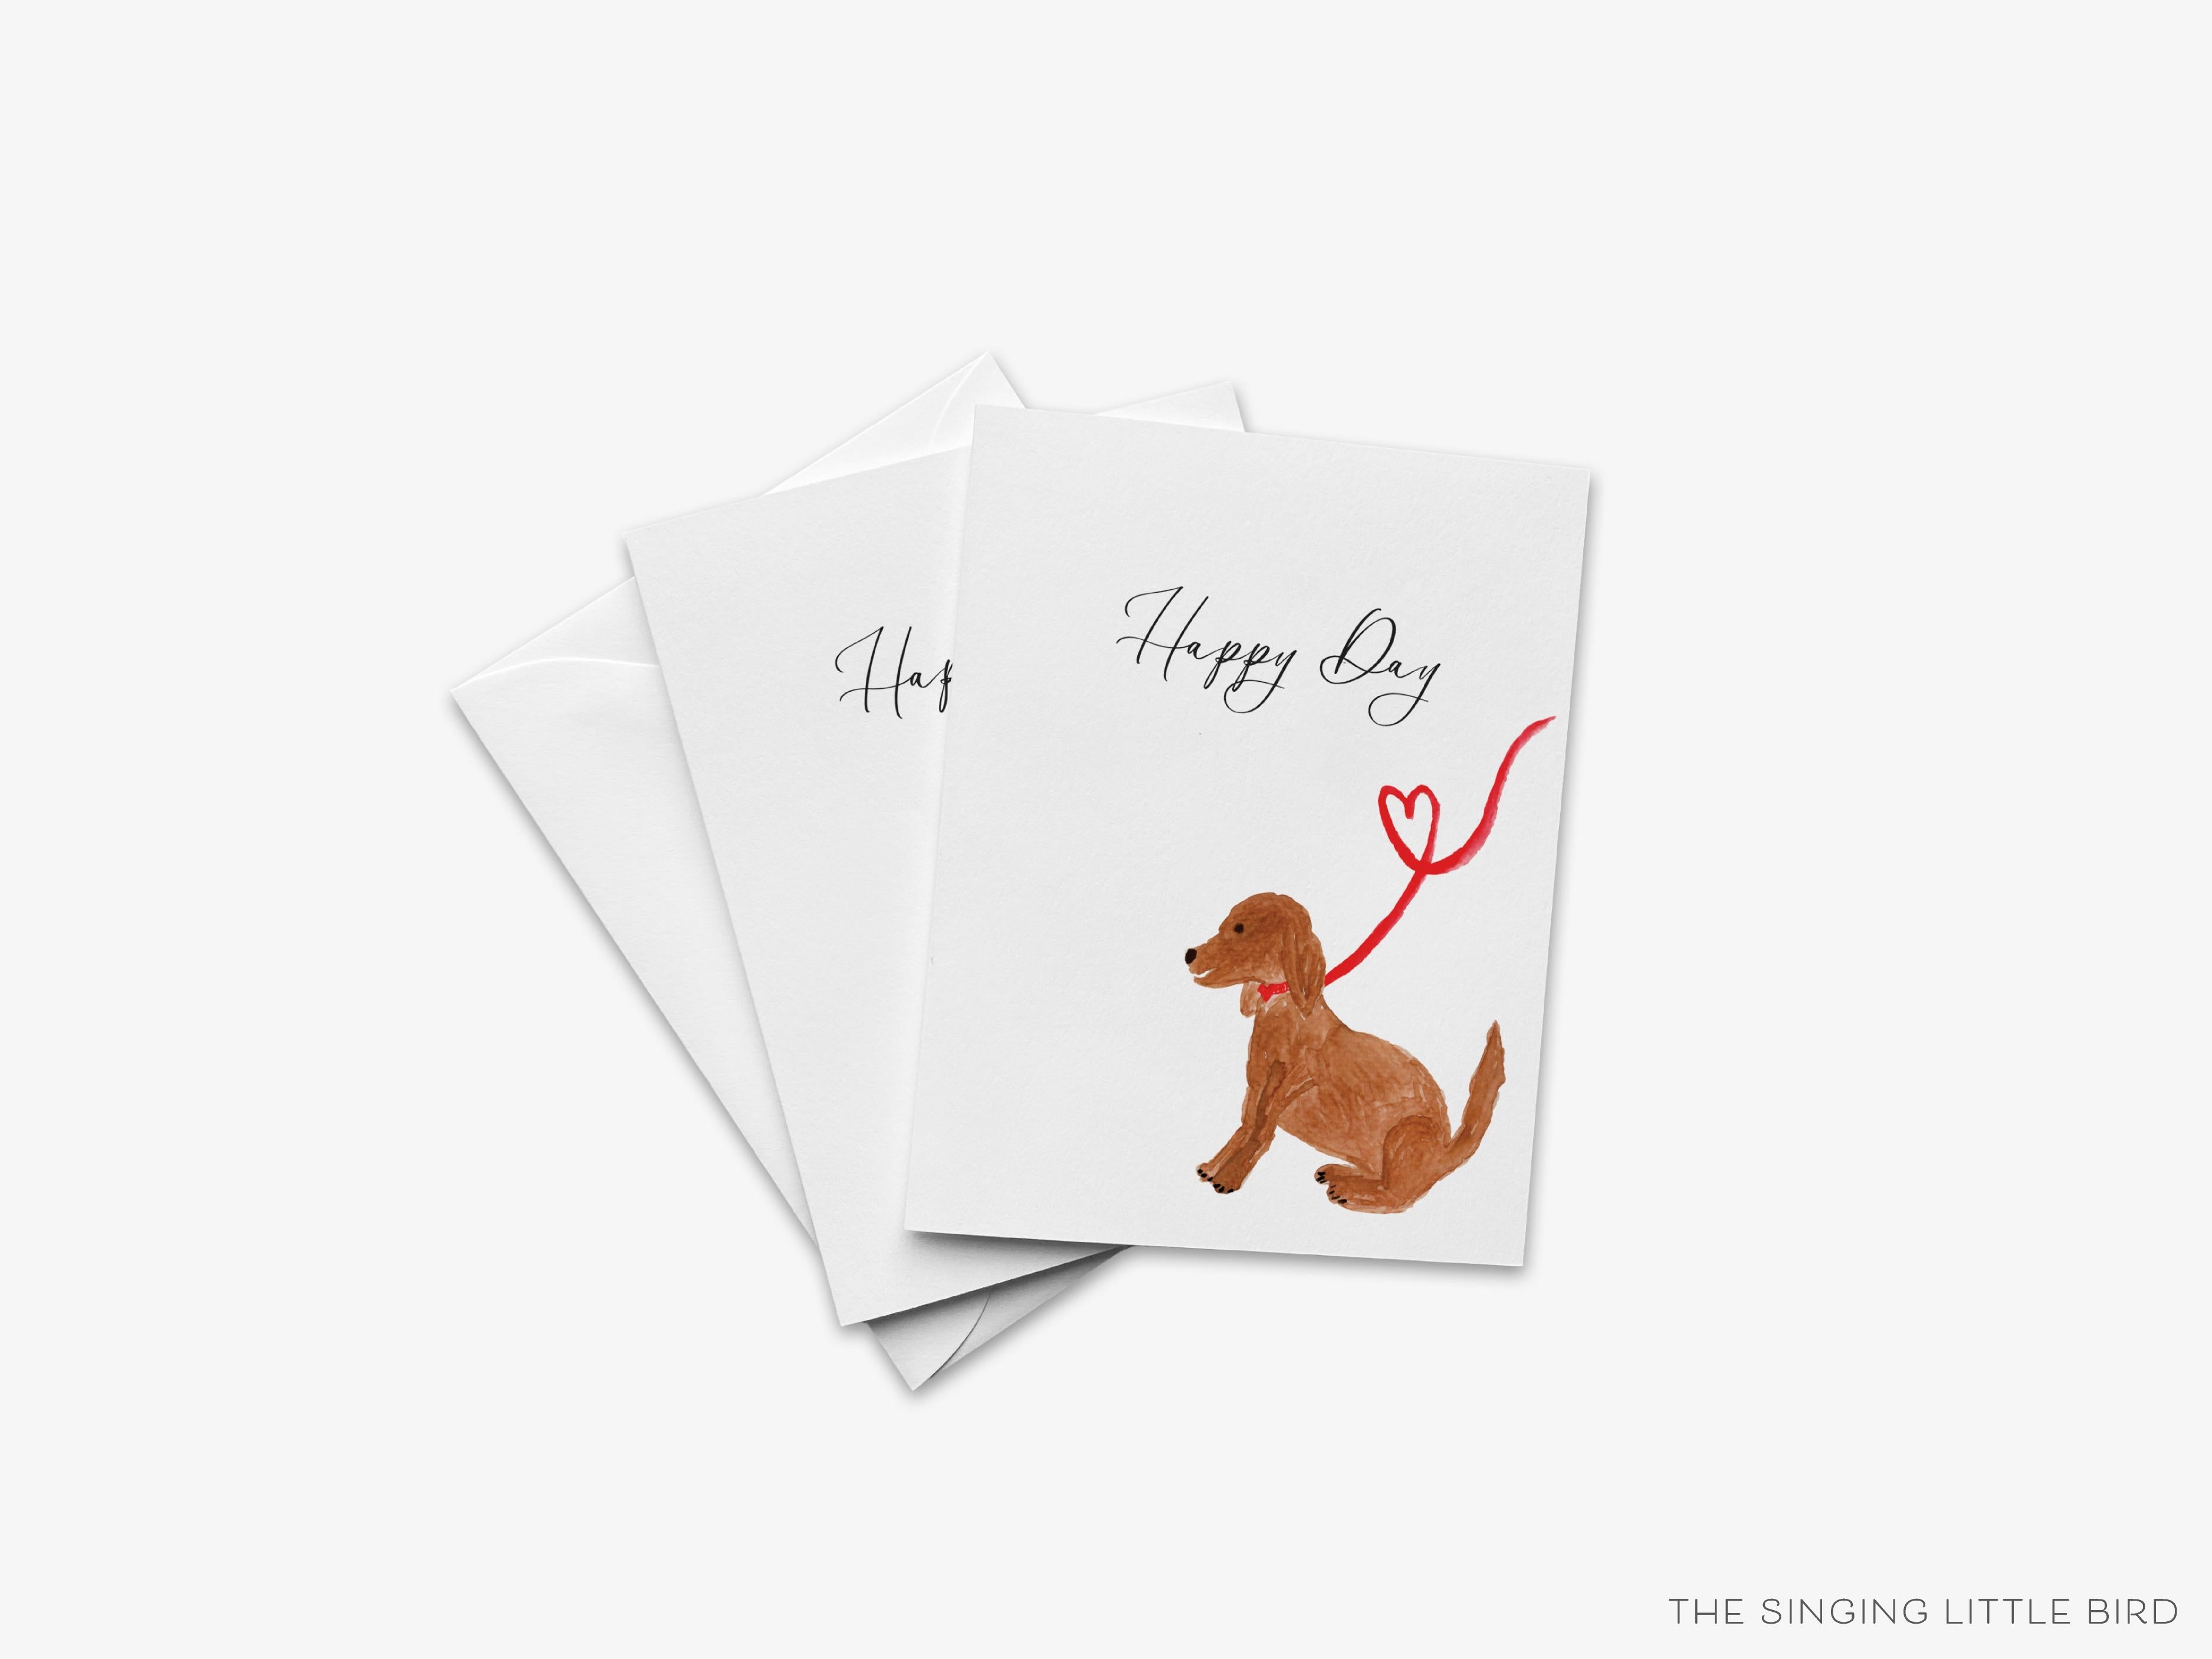 Dog Happy Day Greeting Card-These folded greeting cards are 4.25x5.5 and feature our hand-painted dog, printed in the USA on 100lb textured stock. They come with a White envelope and make a great thinking of you card for the puppy lover in your life.-The Singing Little Bird